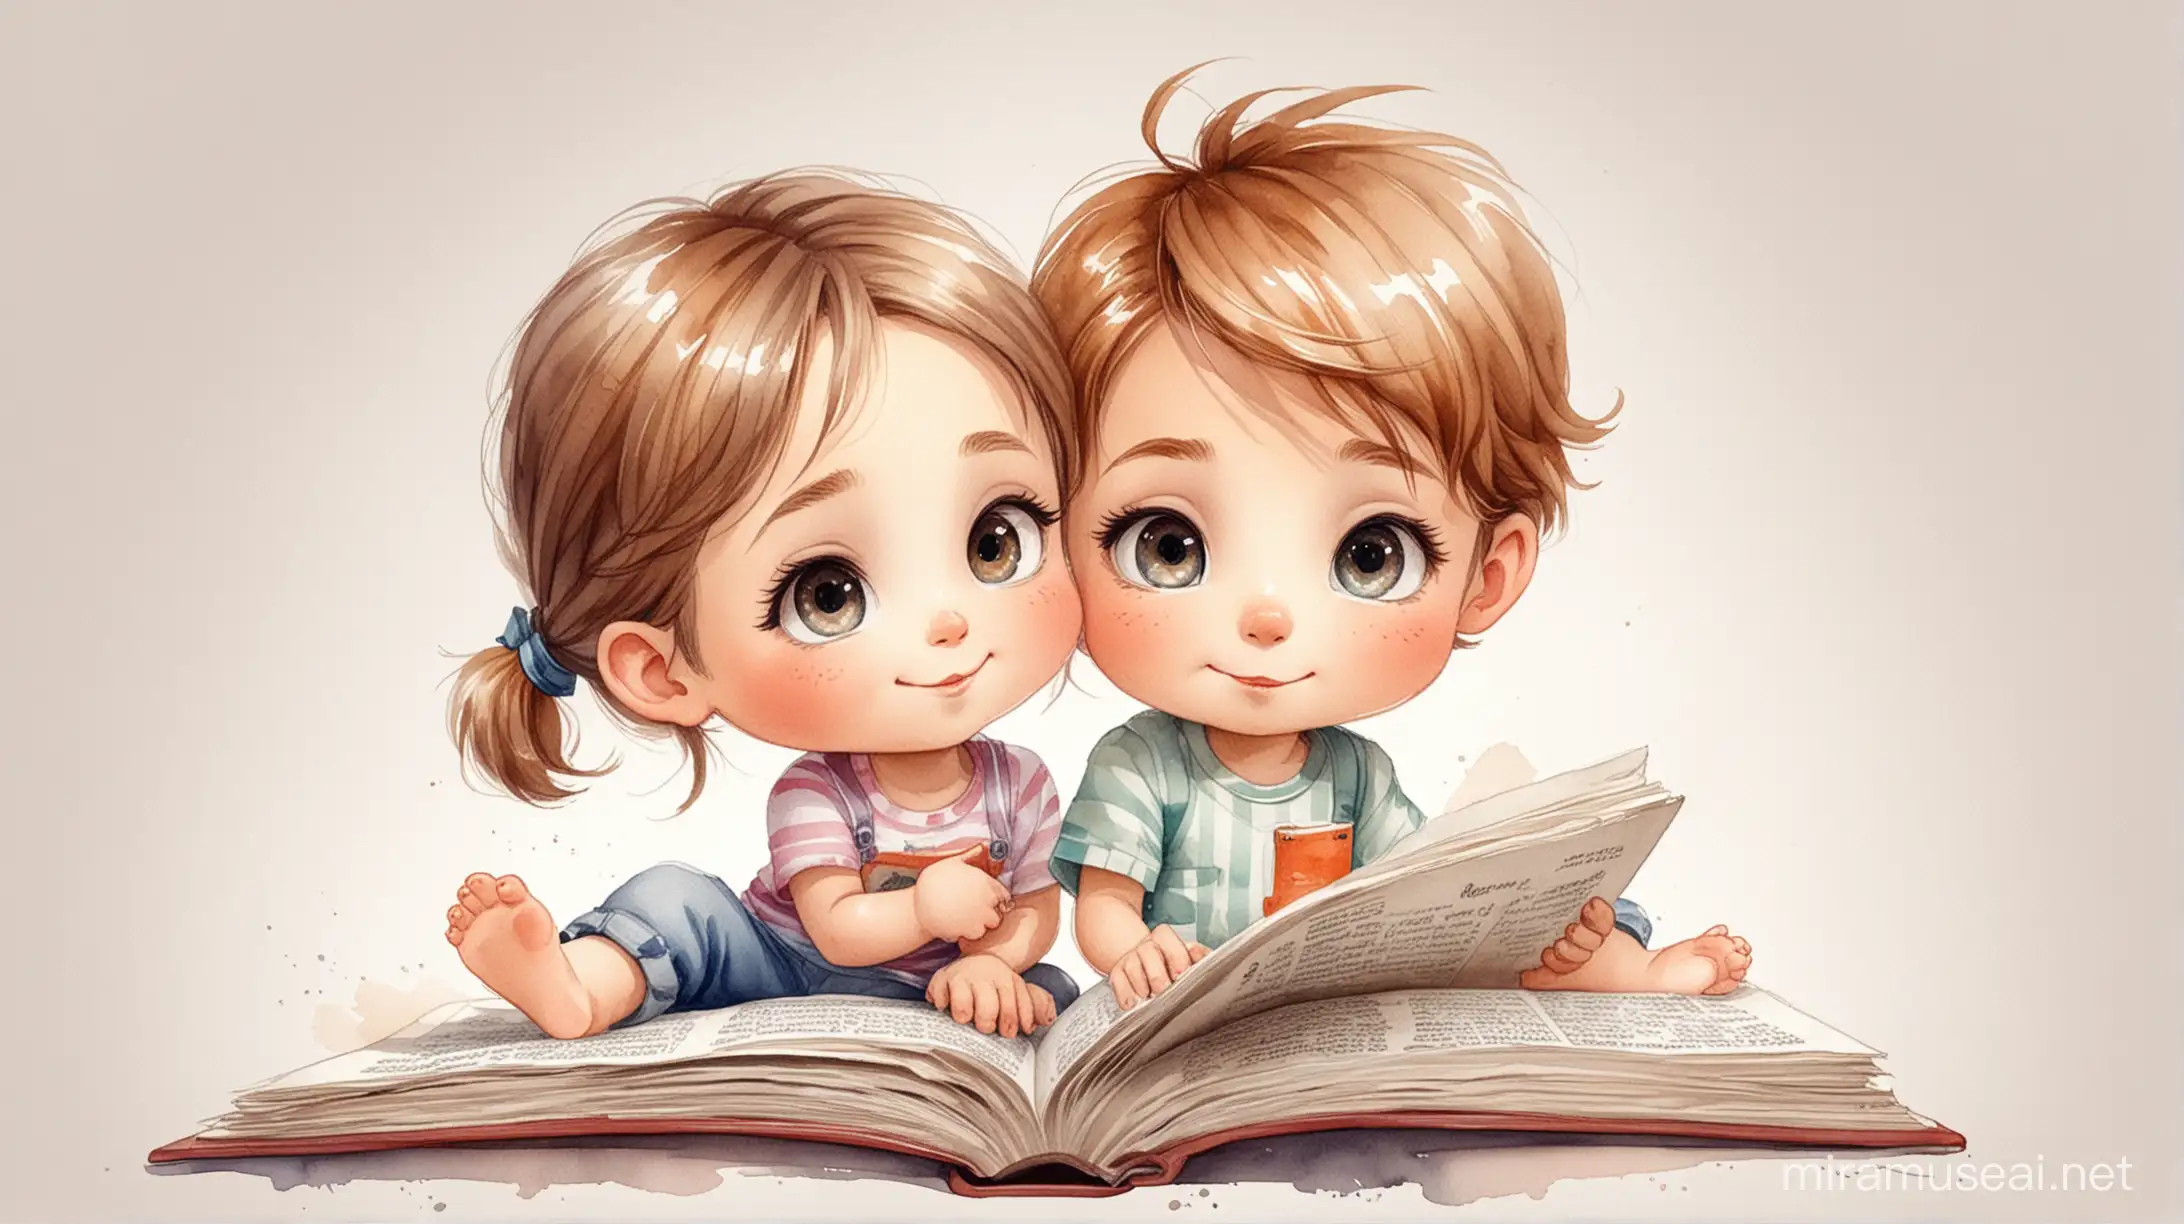 two very cute little kids, boy and girl, reading a book. full body, chibi eyes, watercolor, pencil drawing, white background, children book illustration